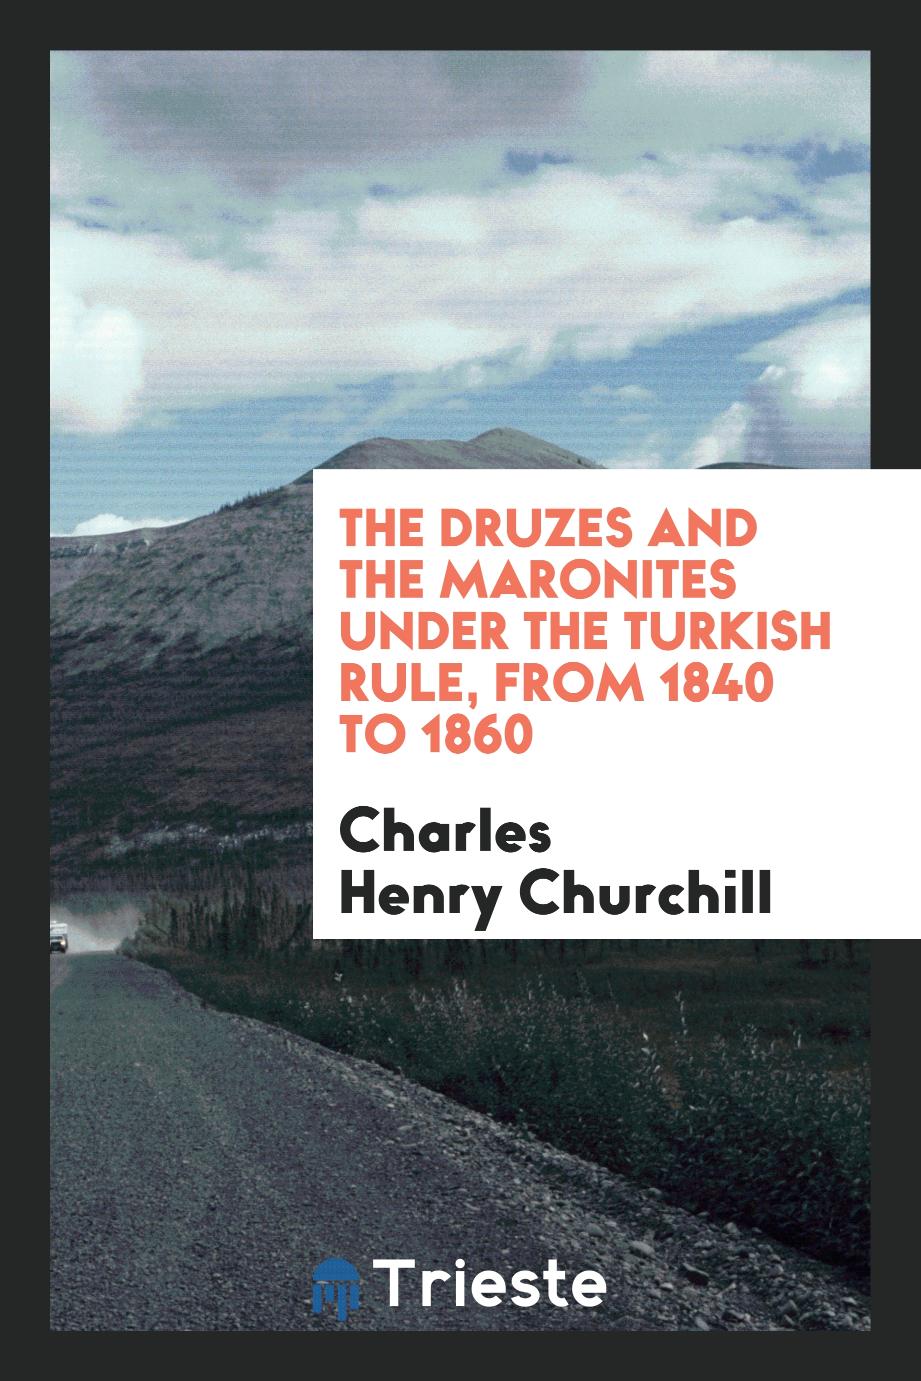 The Druzes and the Maronites Under the Turkish Rule, from 1840 to 1860